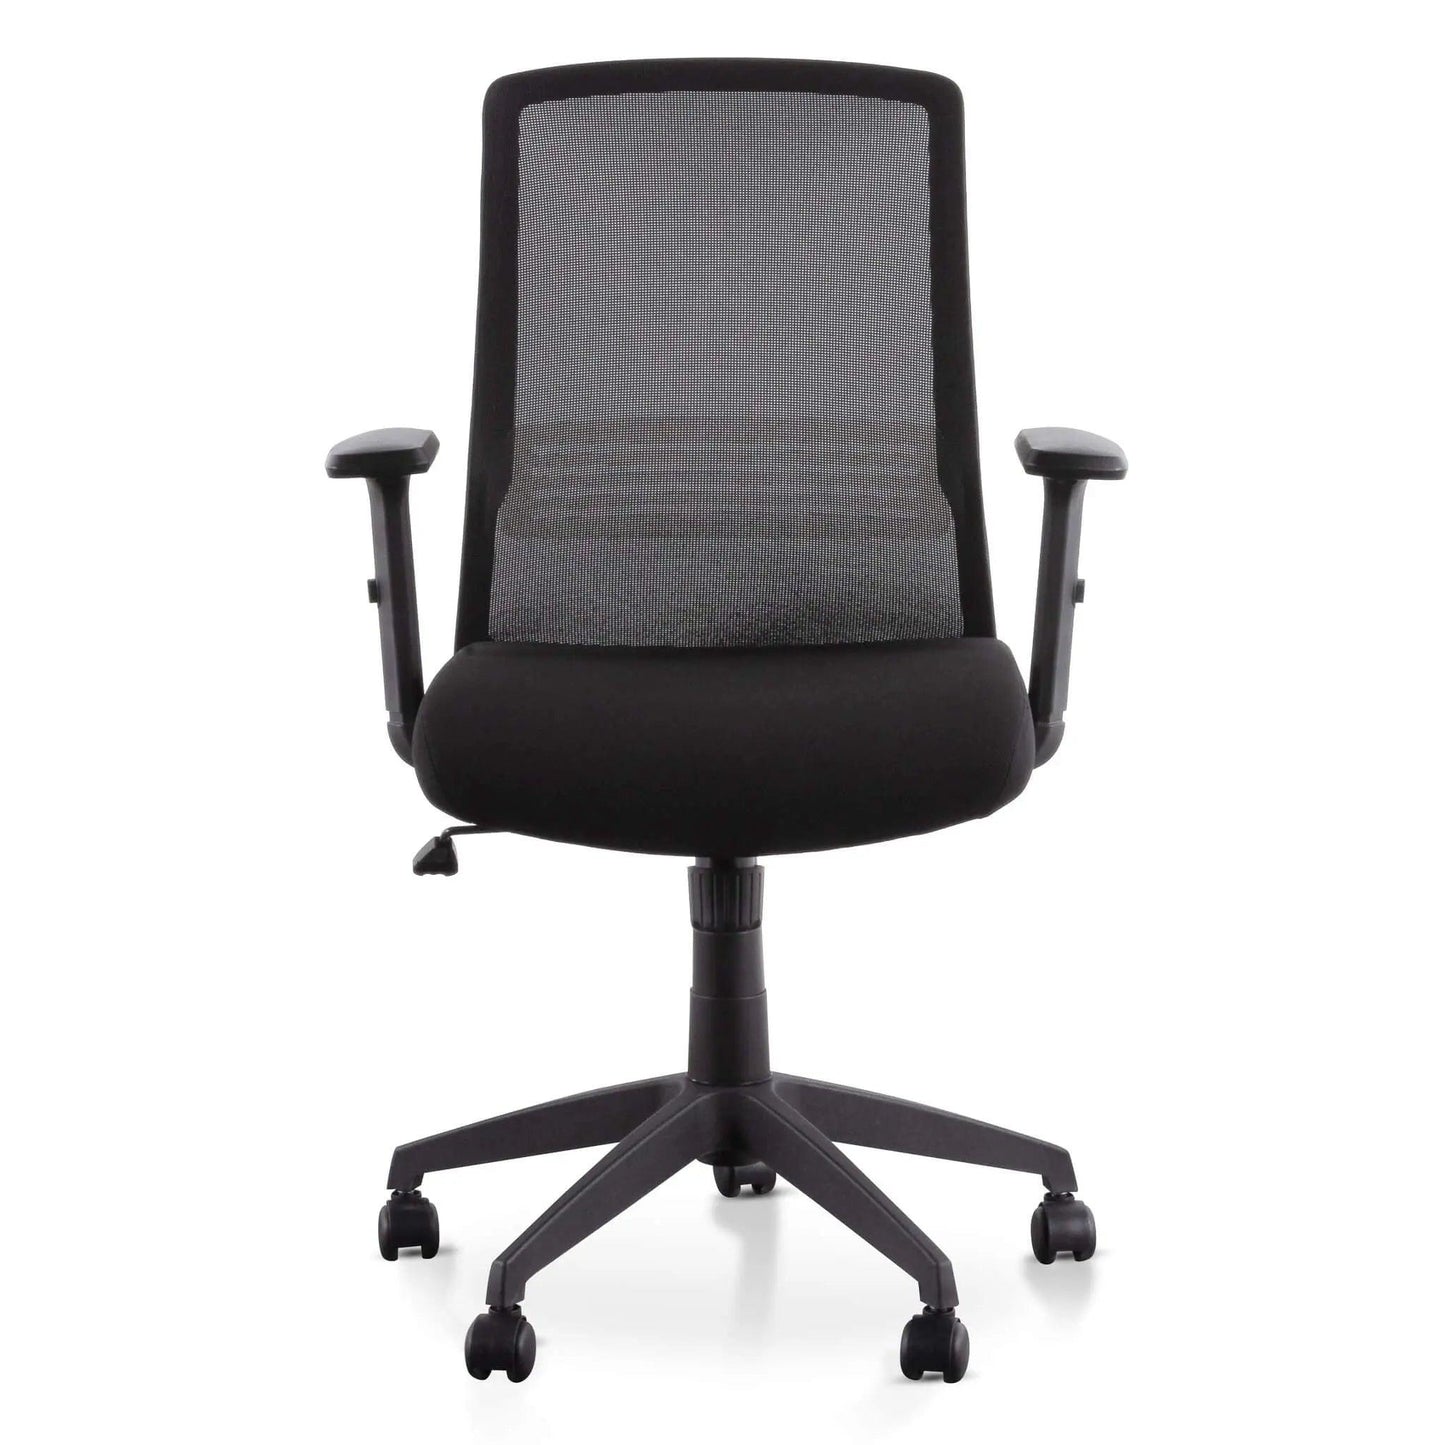 Calibre Mesh Office Chair - Full Black OC6207-LF - Office/Gaming ChairsOC6207-LF 1